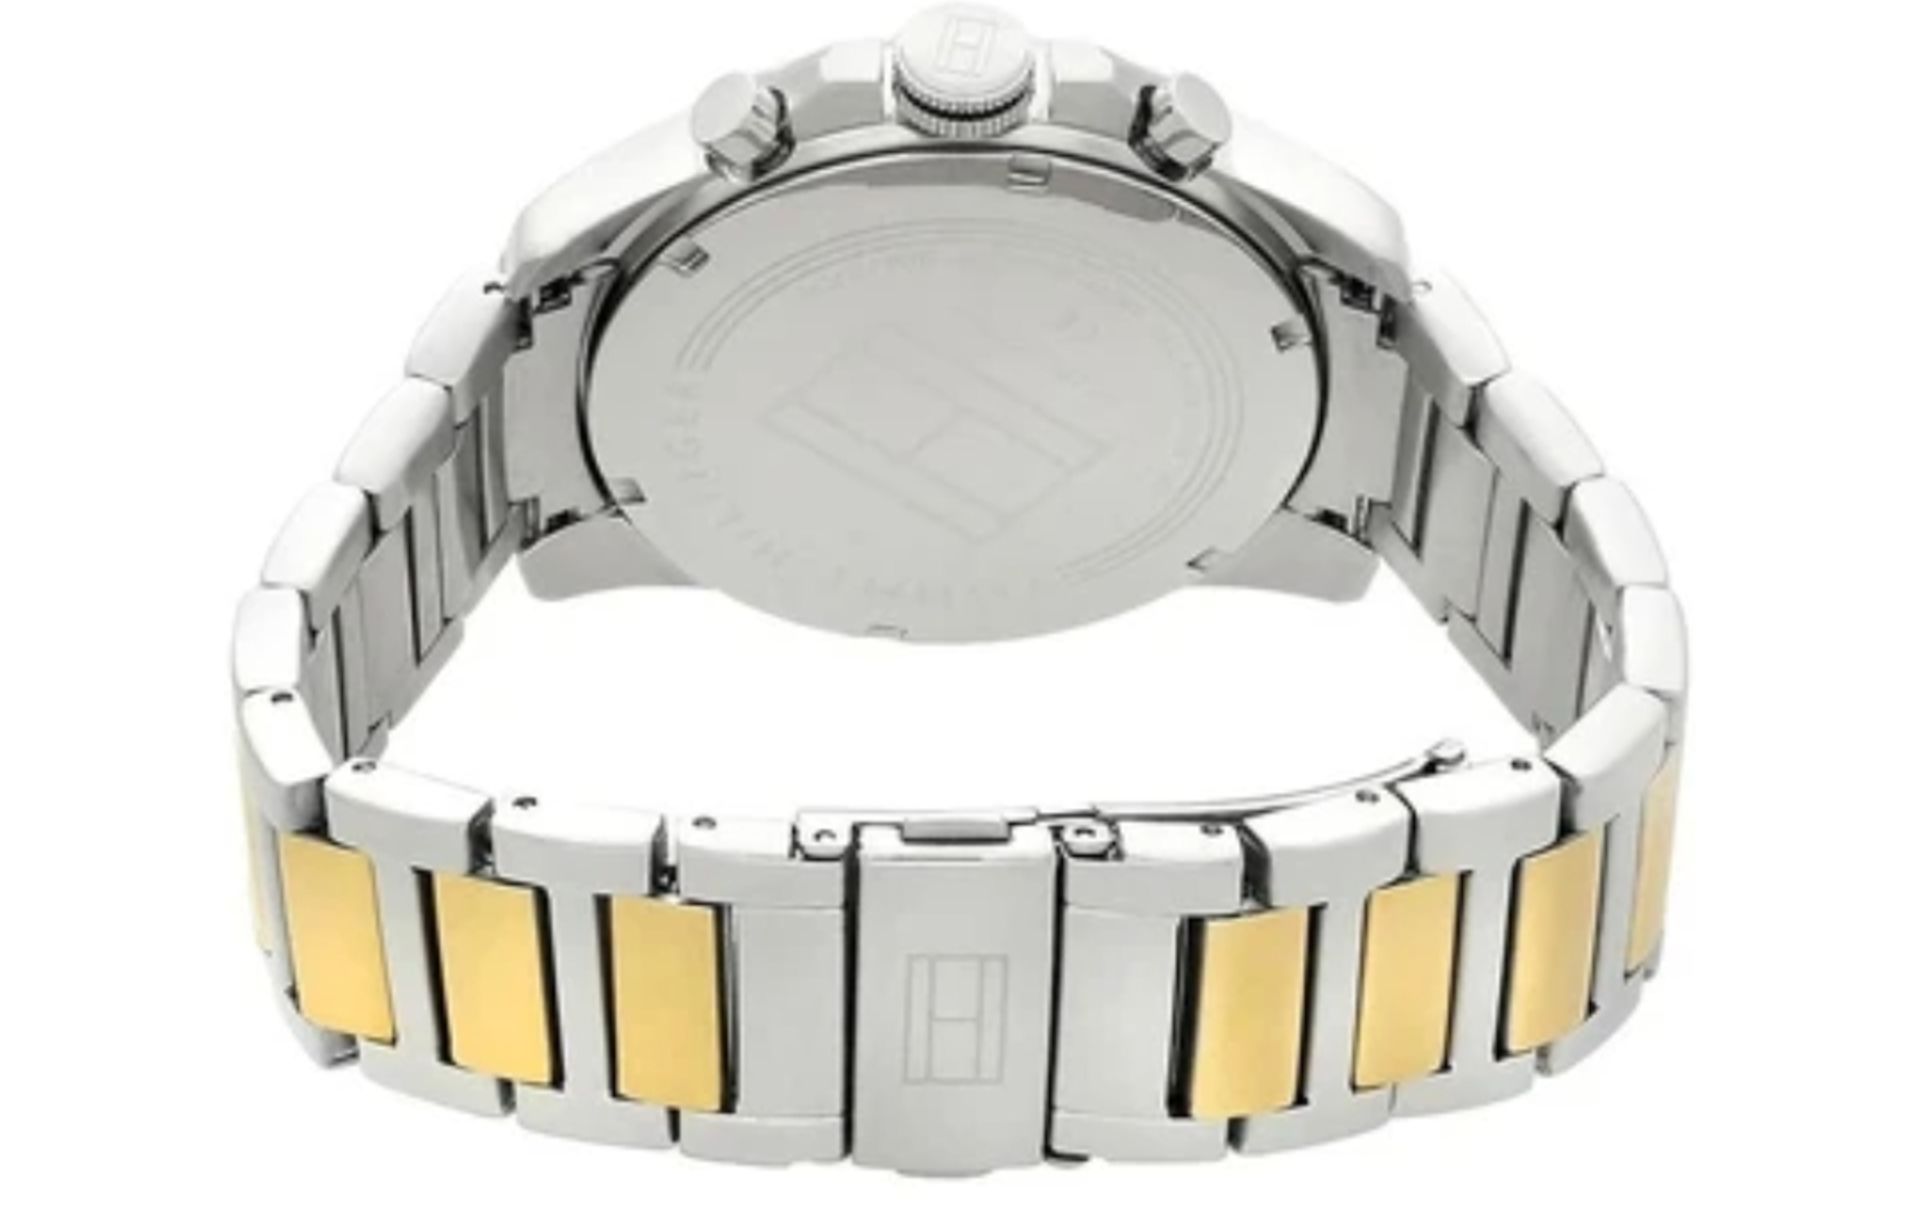 Tommy Hilfiger 1791559 Decker Watch Click on the image to enlarge it Tow-tone & Black Gents Quartz - Image 4 of 5